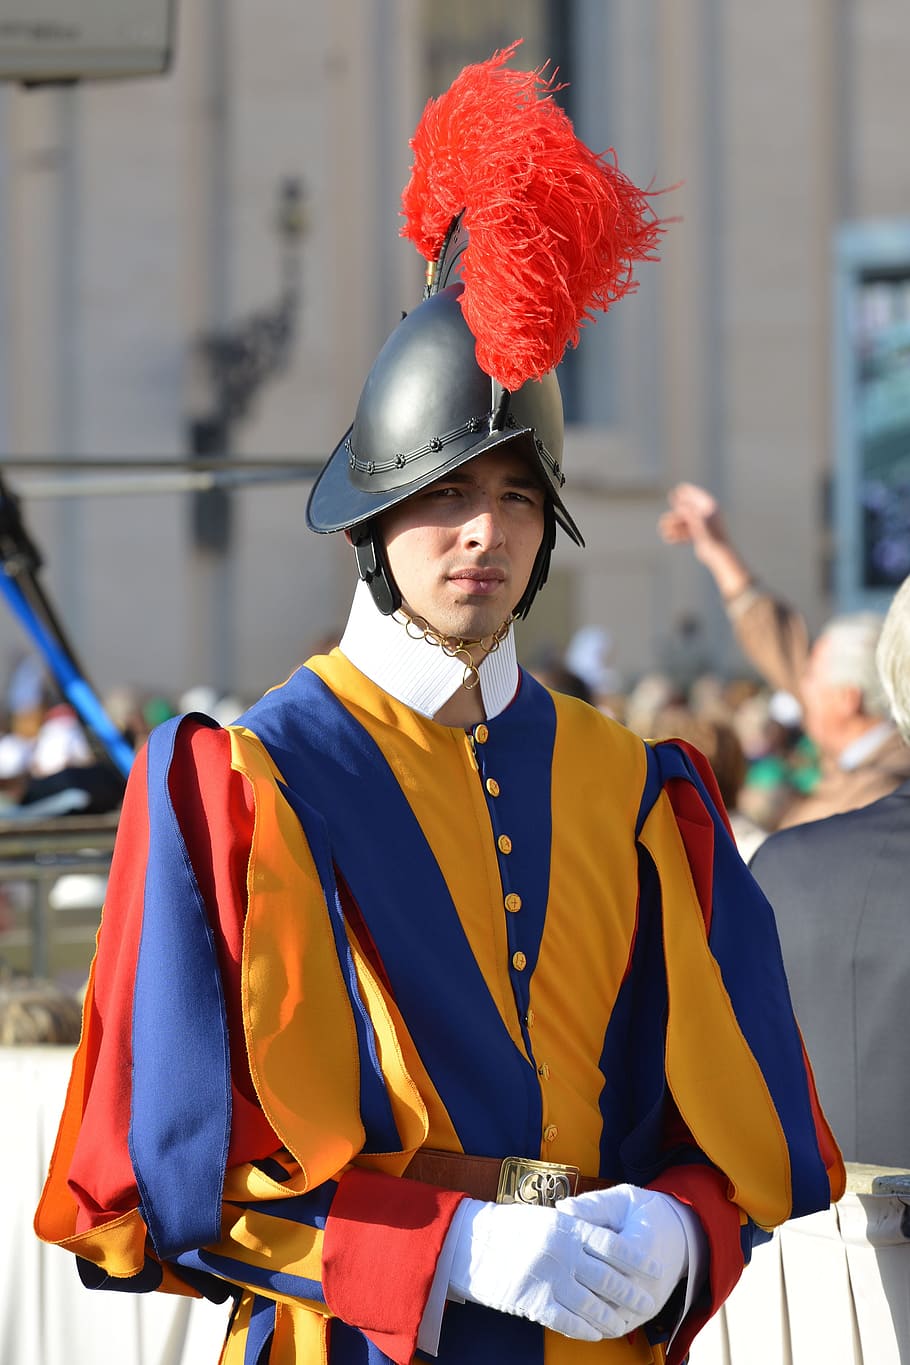 swiss guard, rome, vatican, pope, st peter's basilica, italy